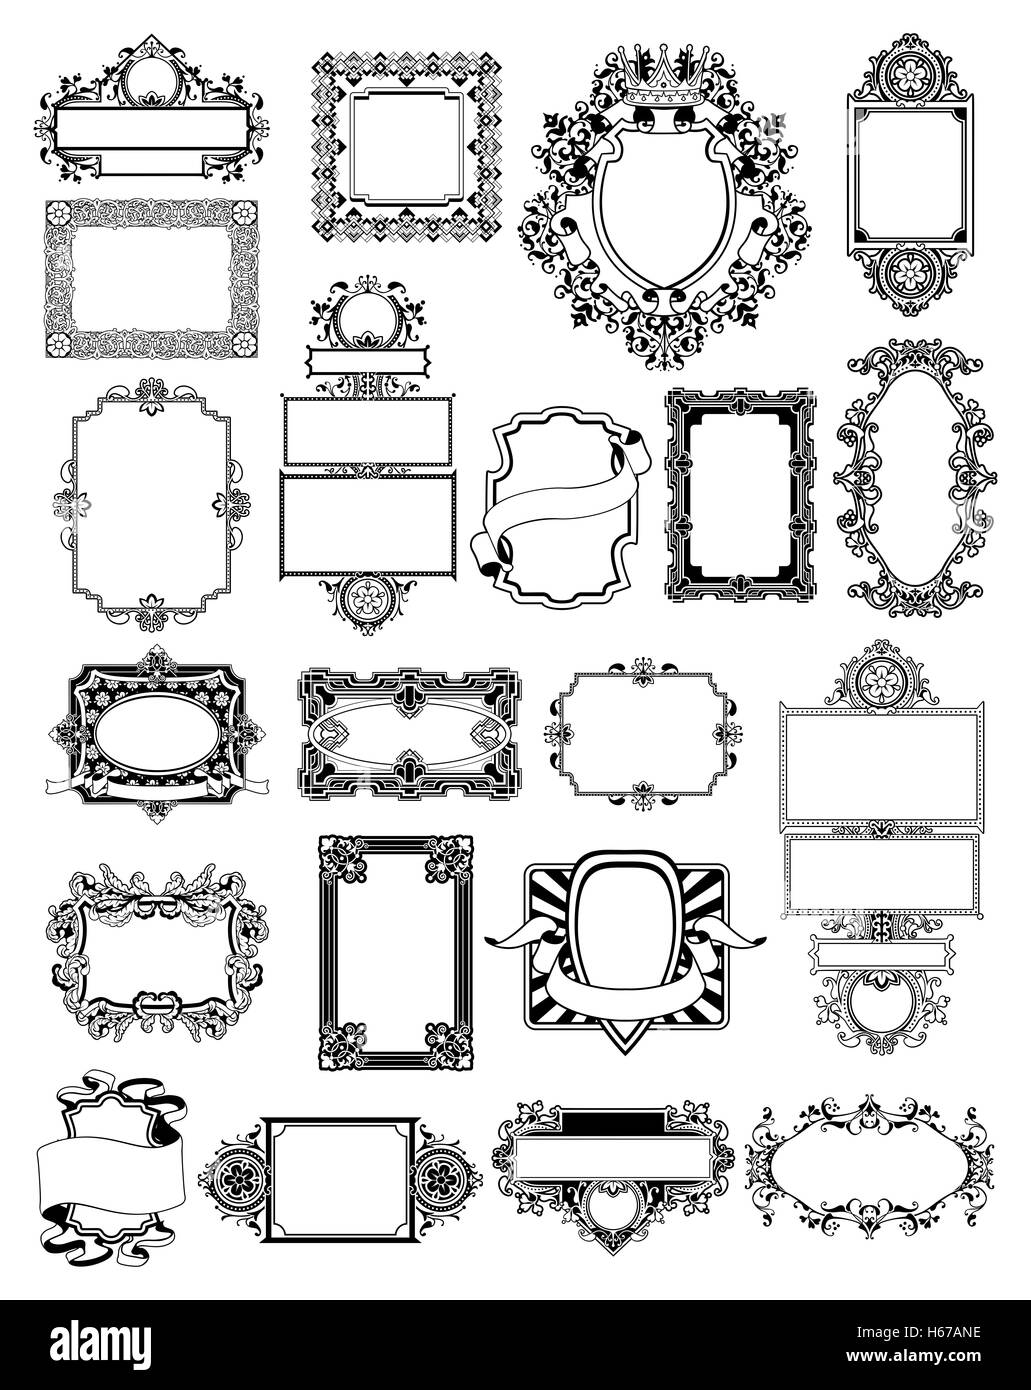 A set of vintage style background frame designs Stock Photo